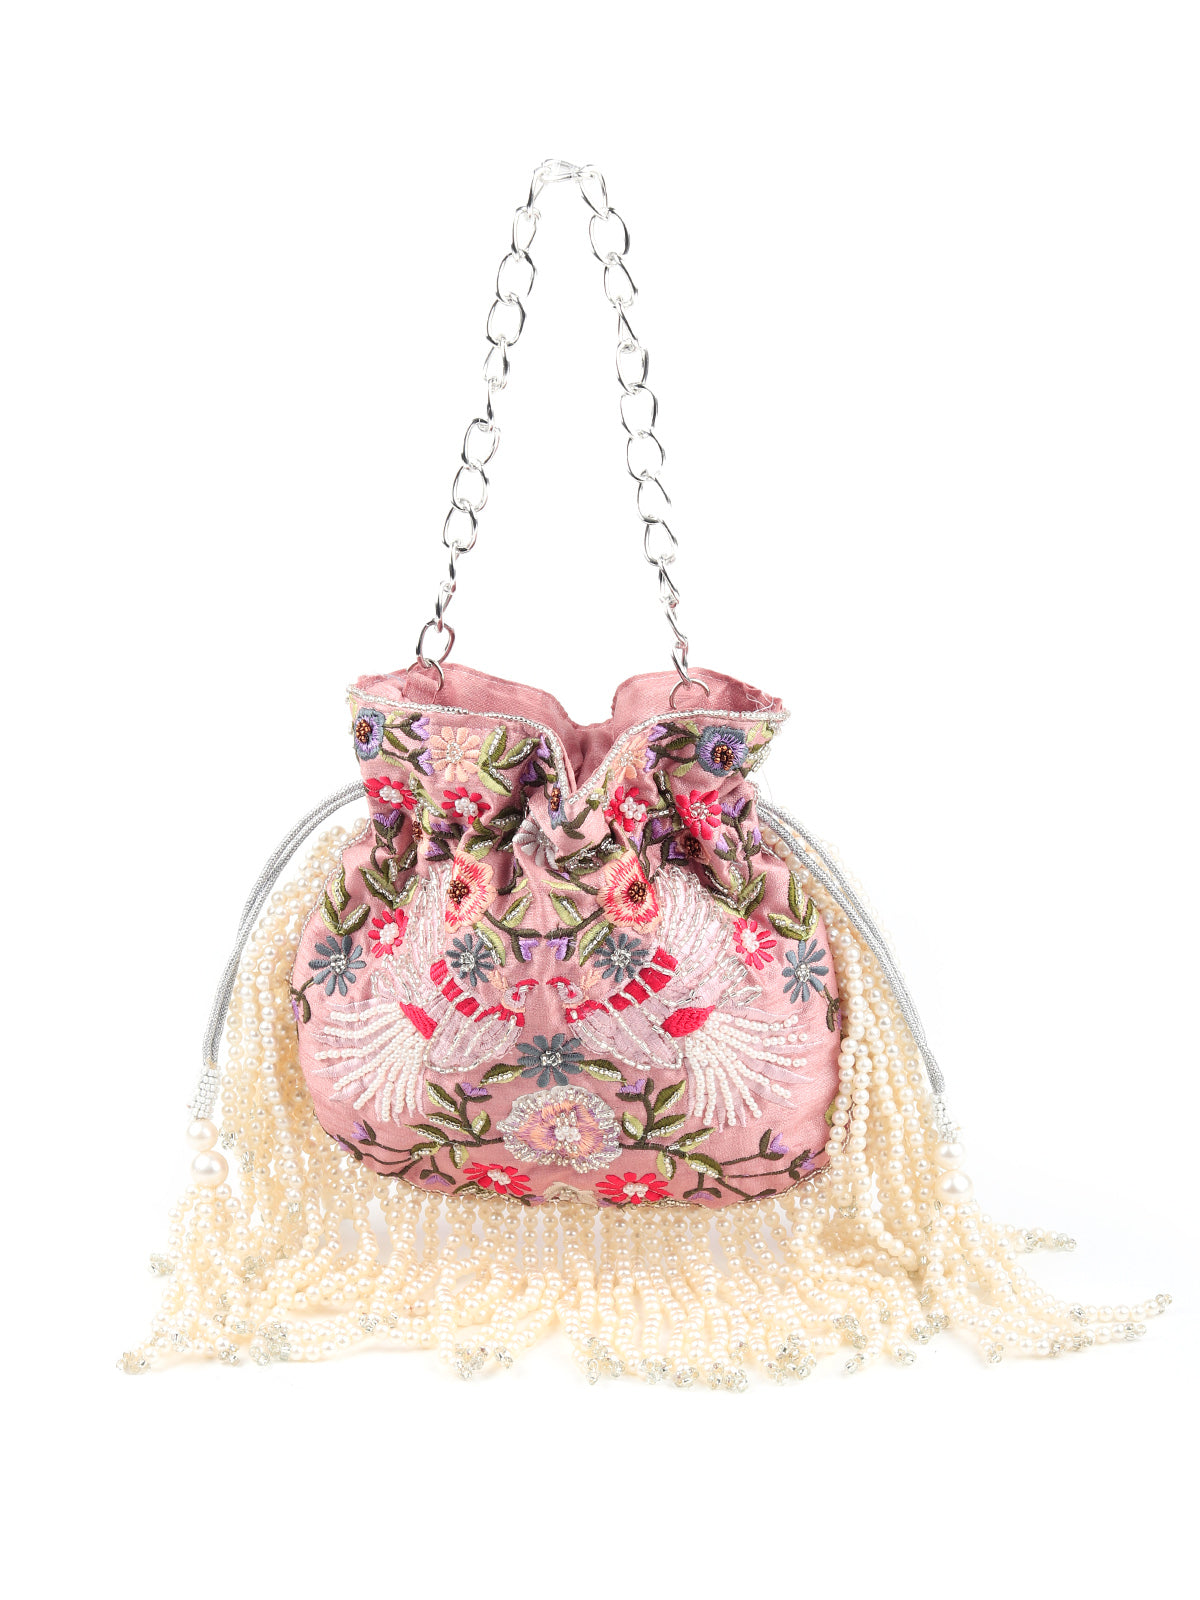 Odette - Peach Pink Embellished Beaded-Embroidered Pearly Potli Bag